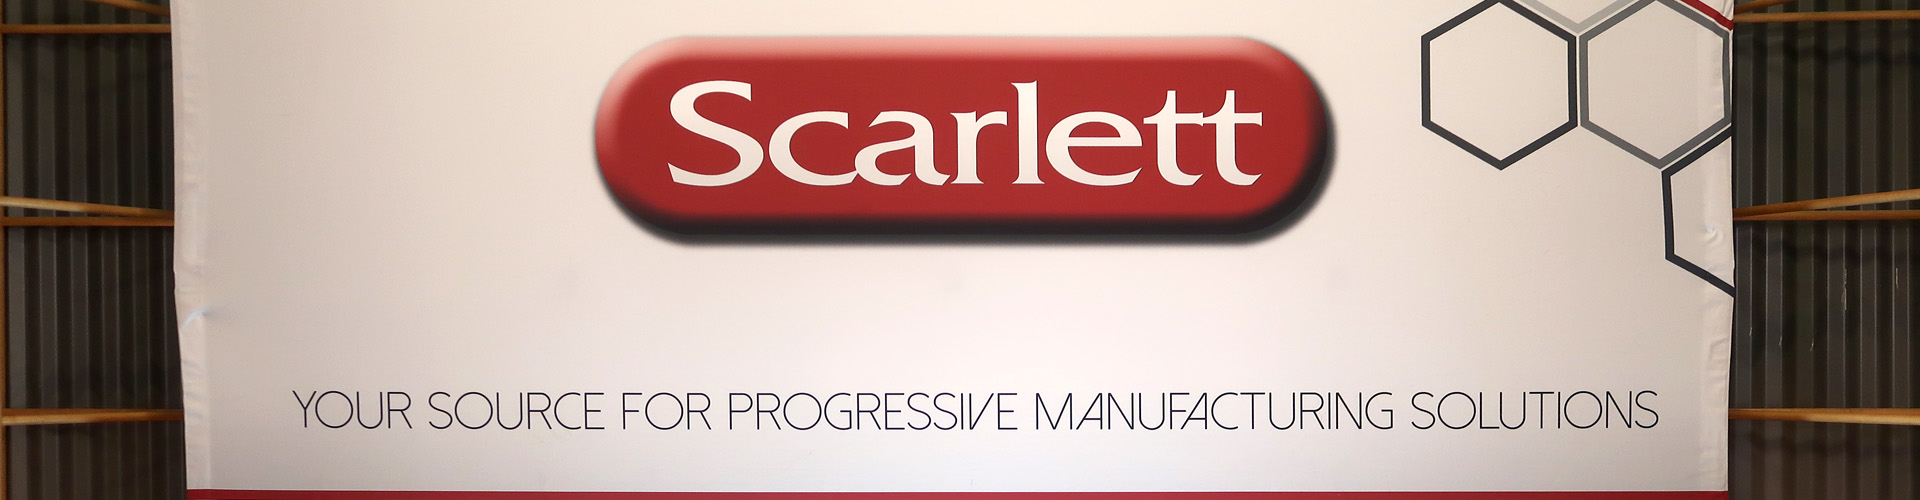 Scarlett: Your Source for Progressive Manufacturing Solutions